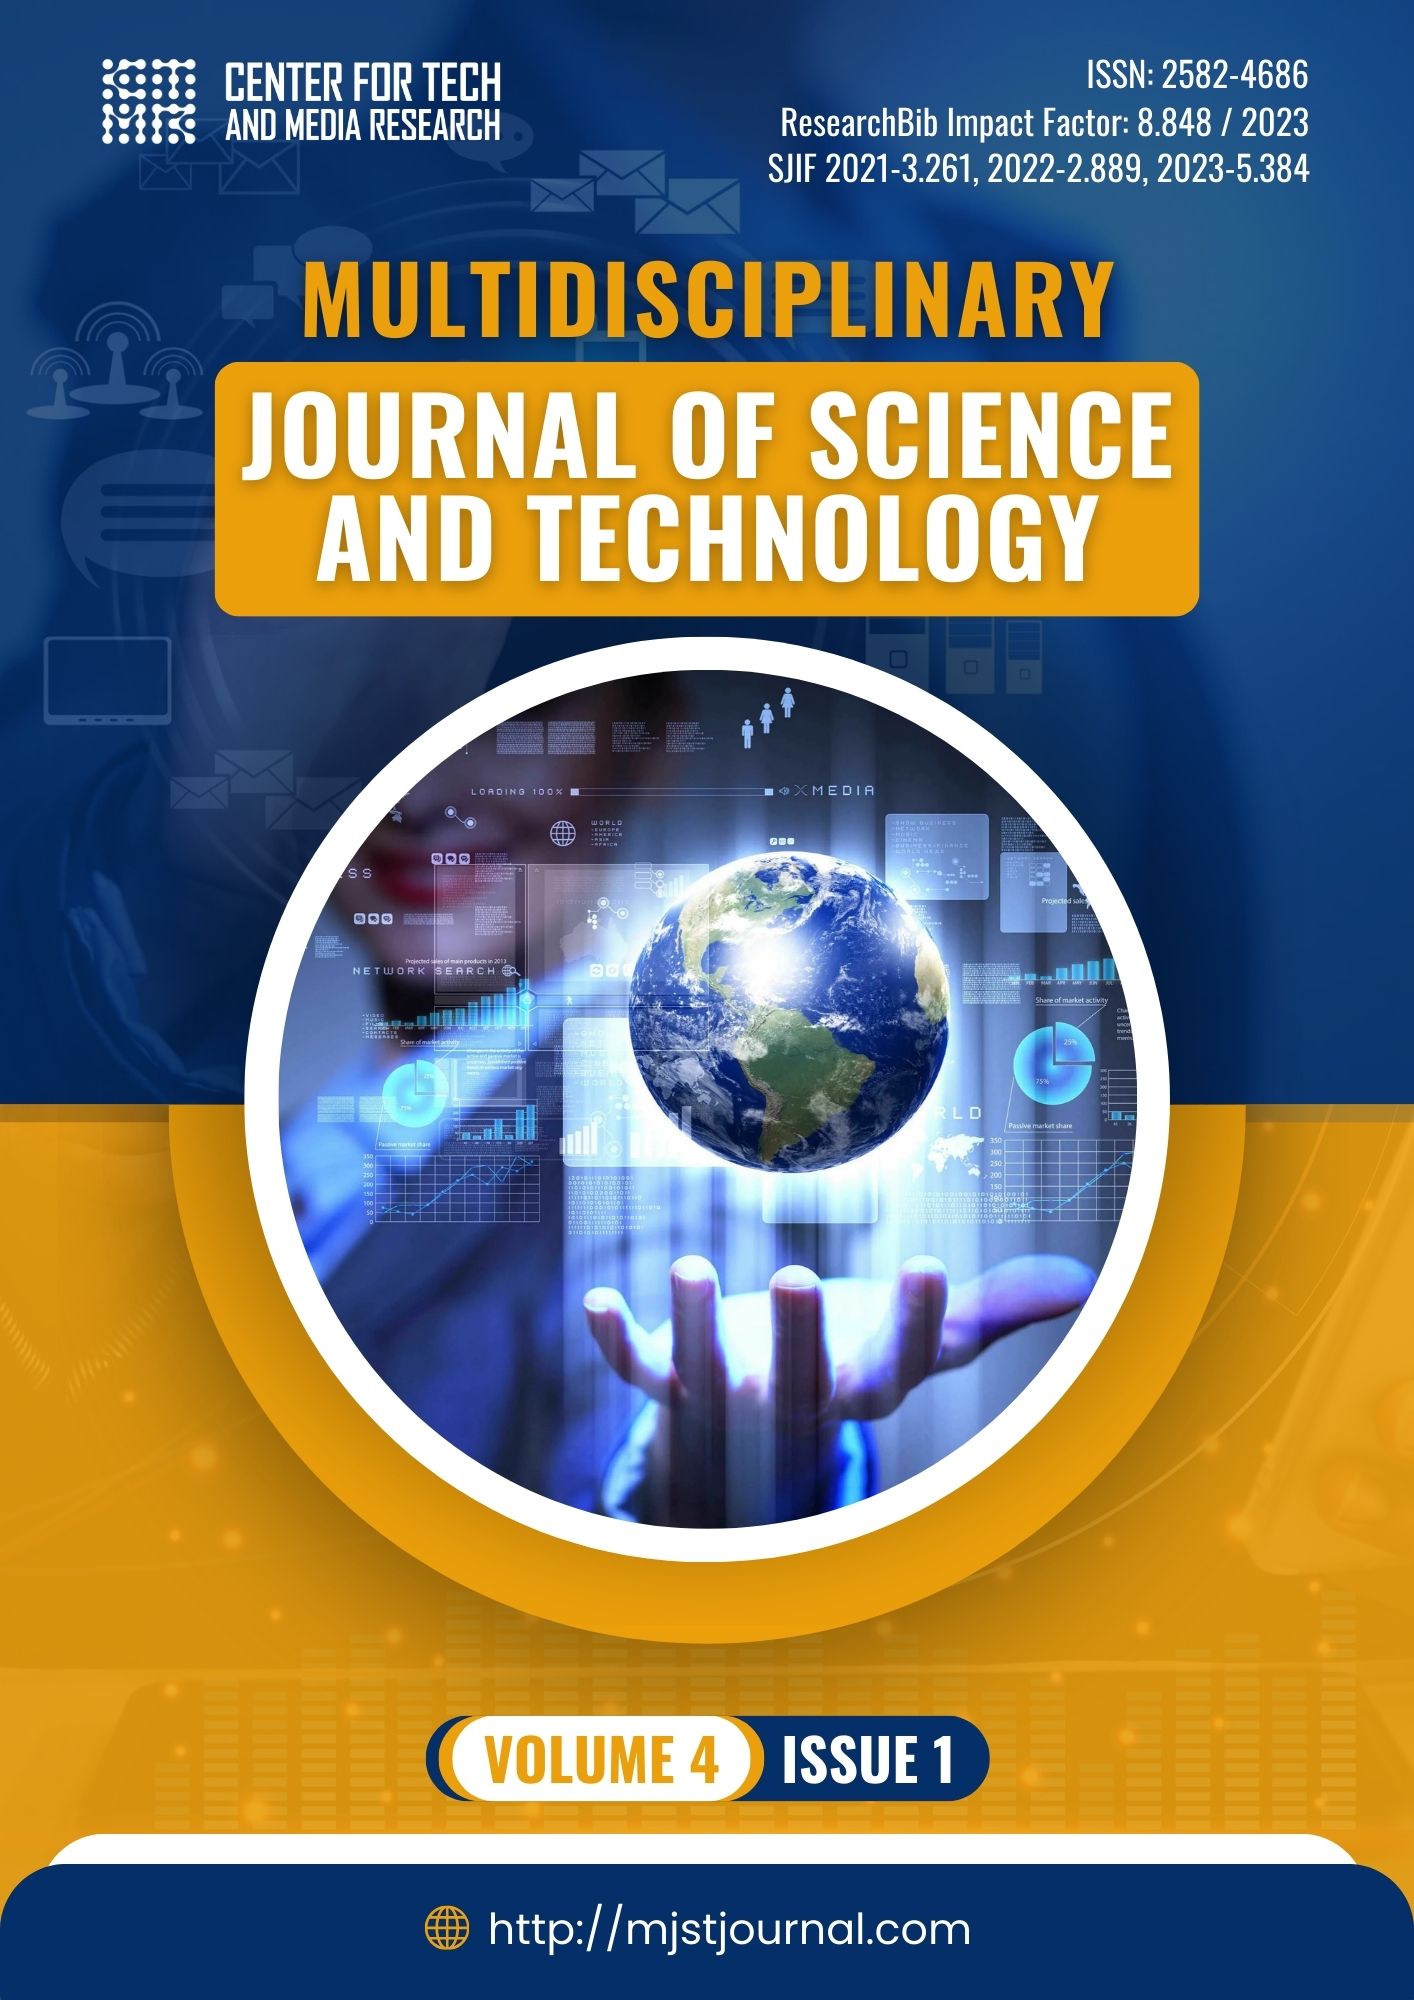                         View Vol. 4 No. 1 (2024): MULTIDISCIPLINARY JOURNAL OF SCIENCE AND TECHNOLOGY
                    